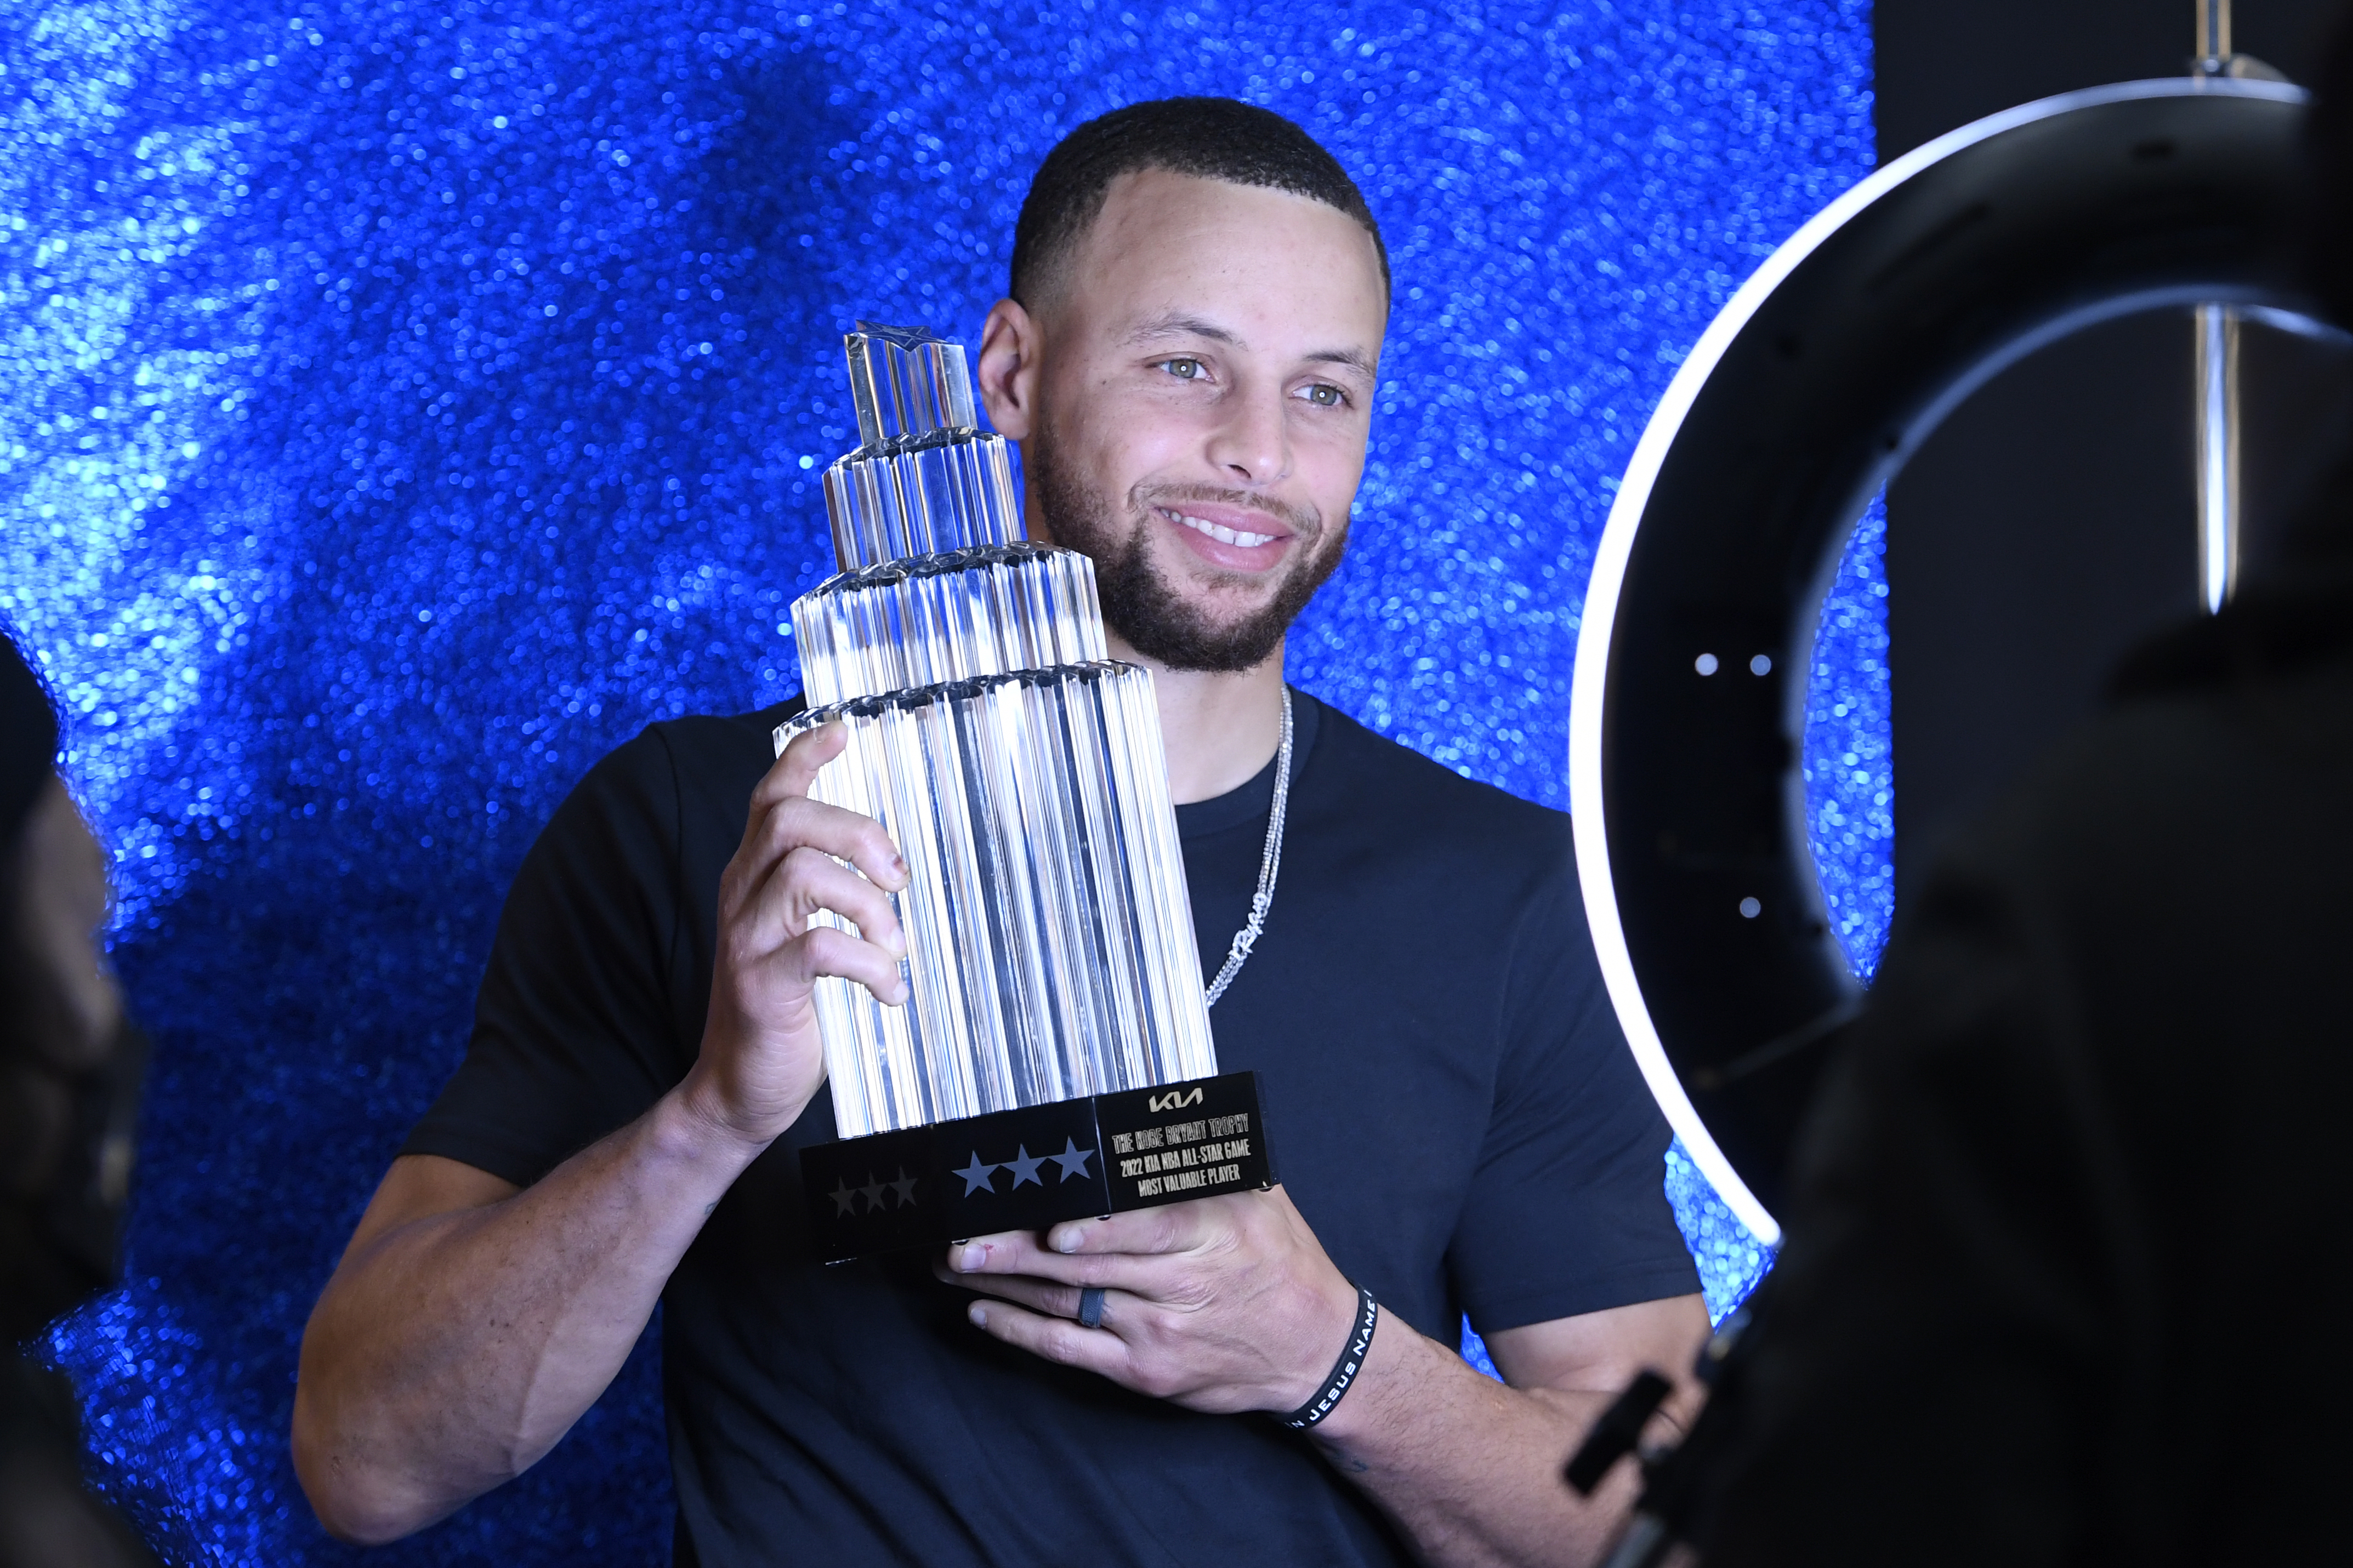 Steph Curry holding up his All-Star GameMVP trophy in front of a ring light